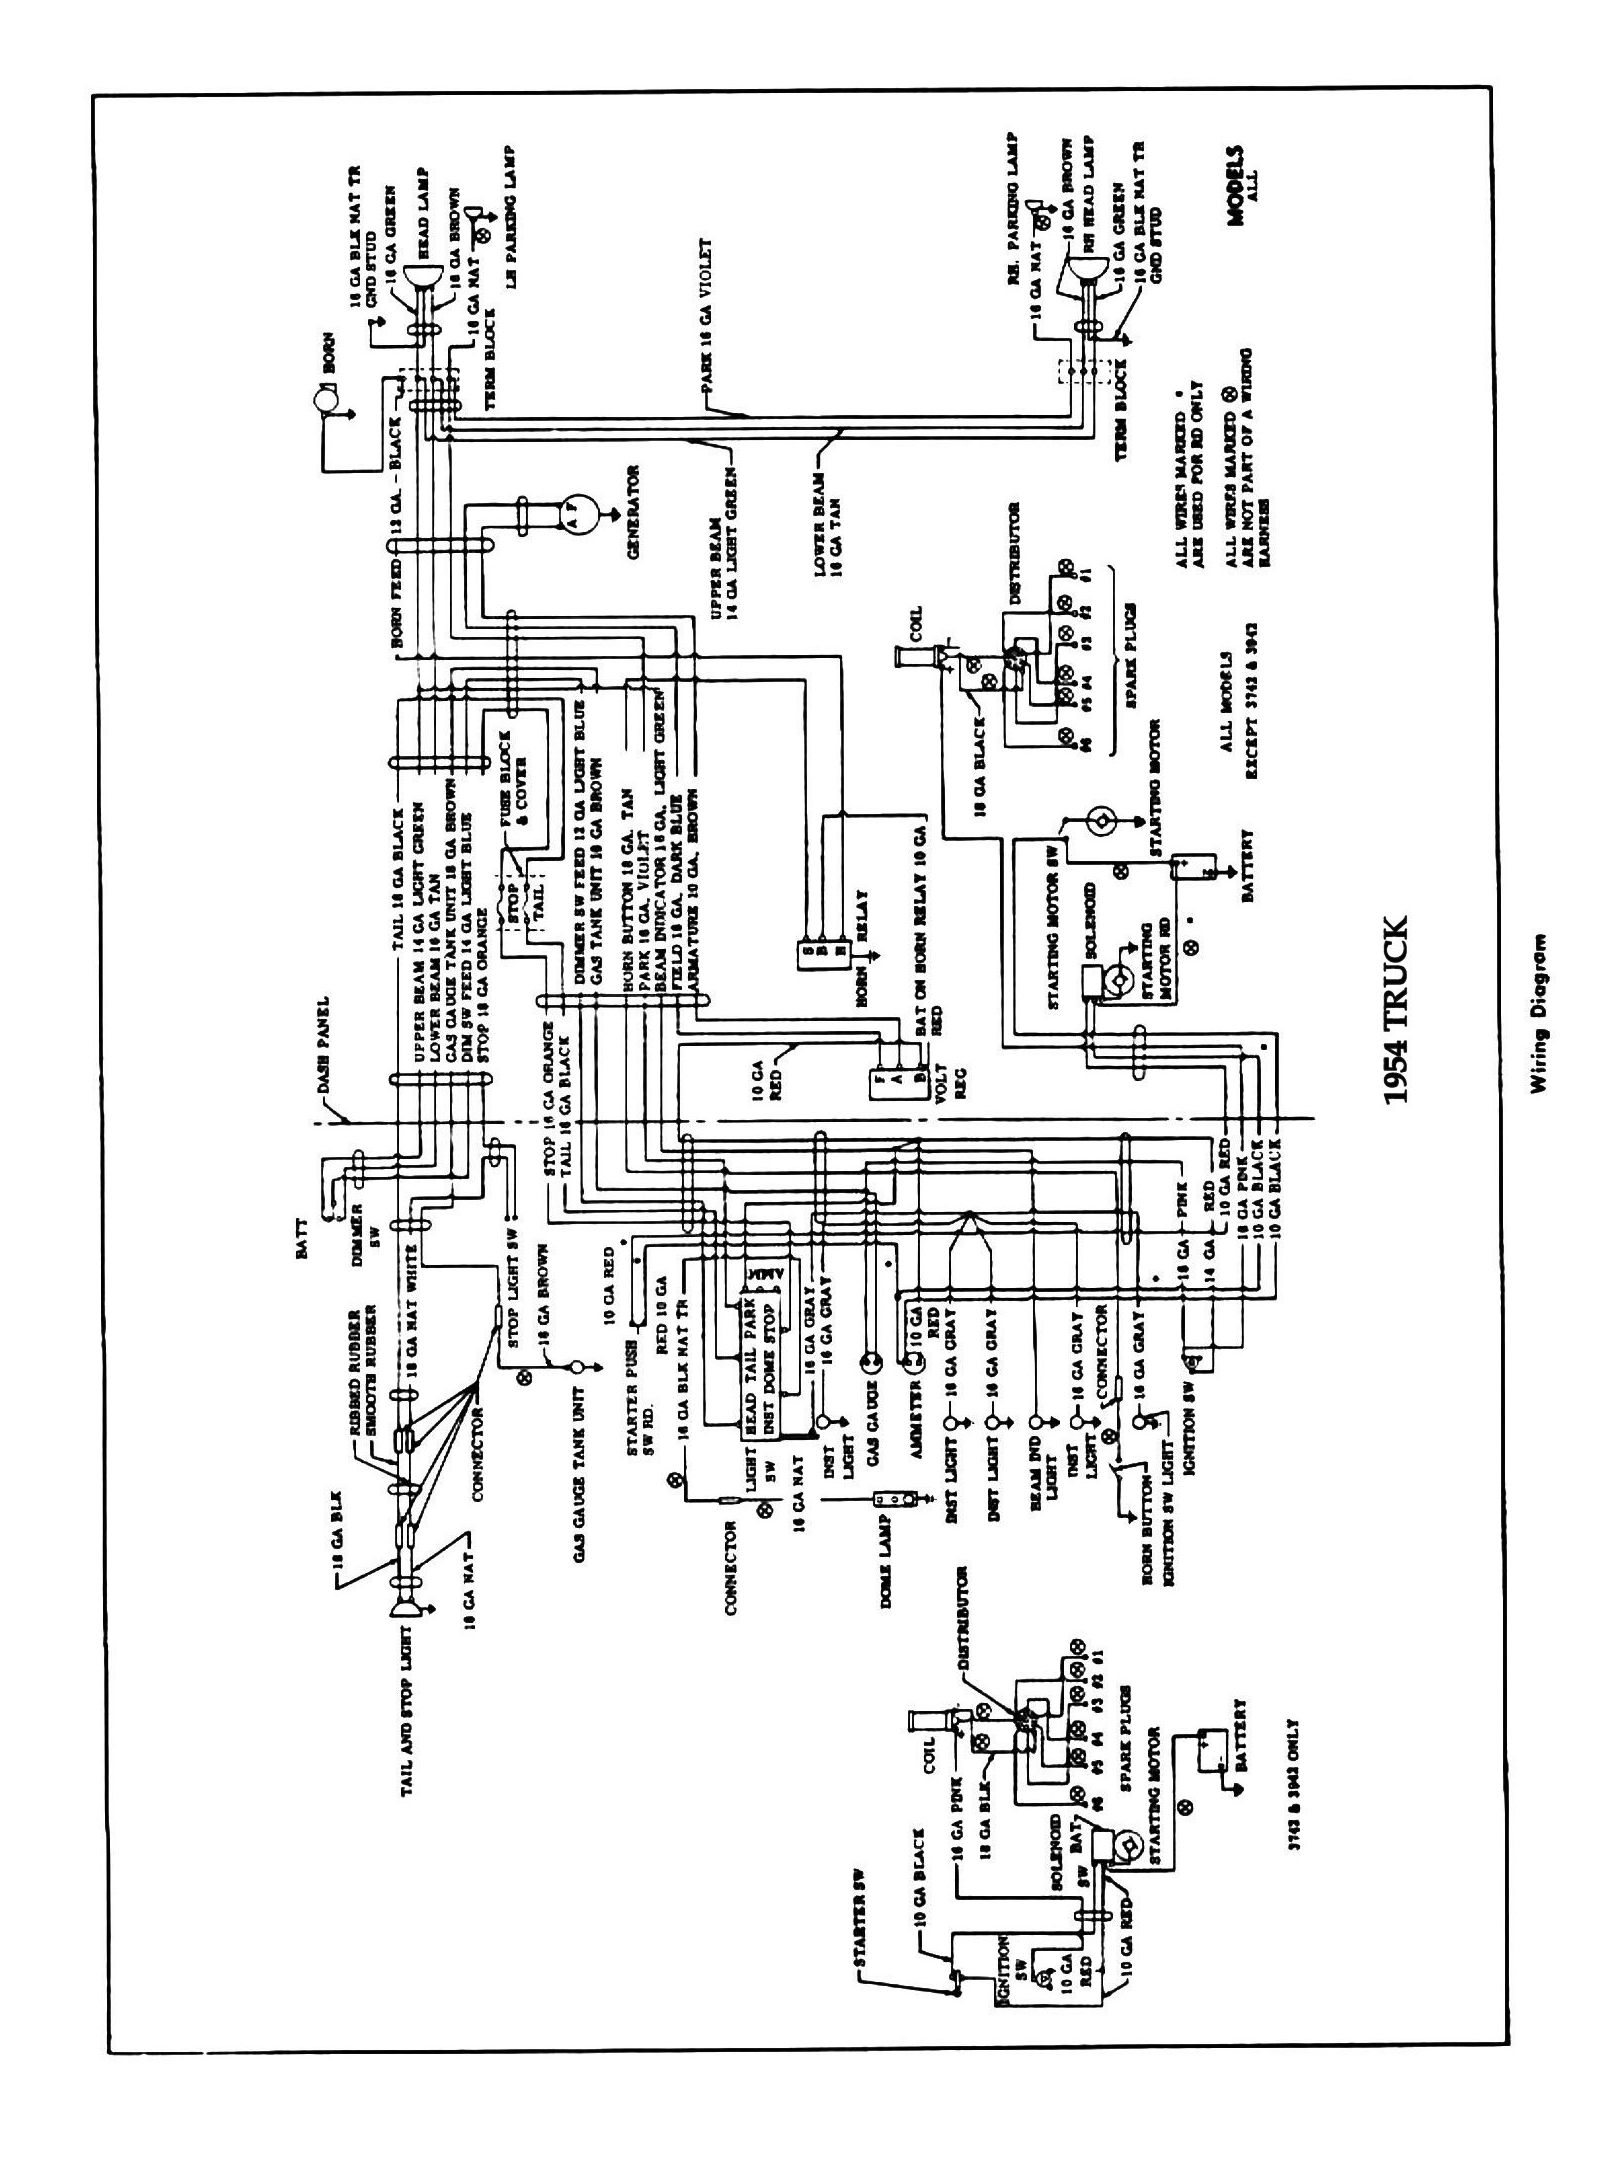 1952 Chevy Truck Ignition Wiring Diagram